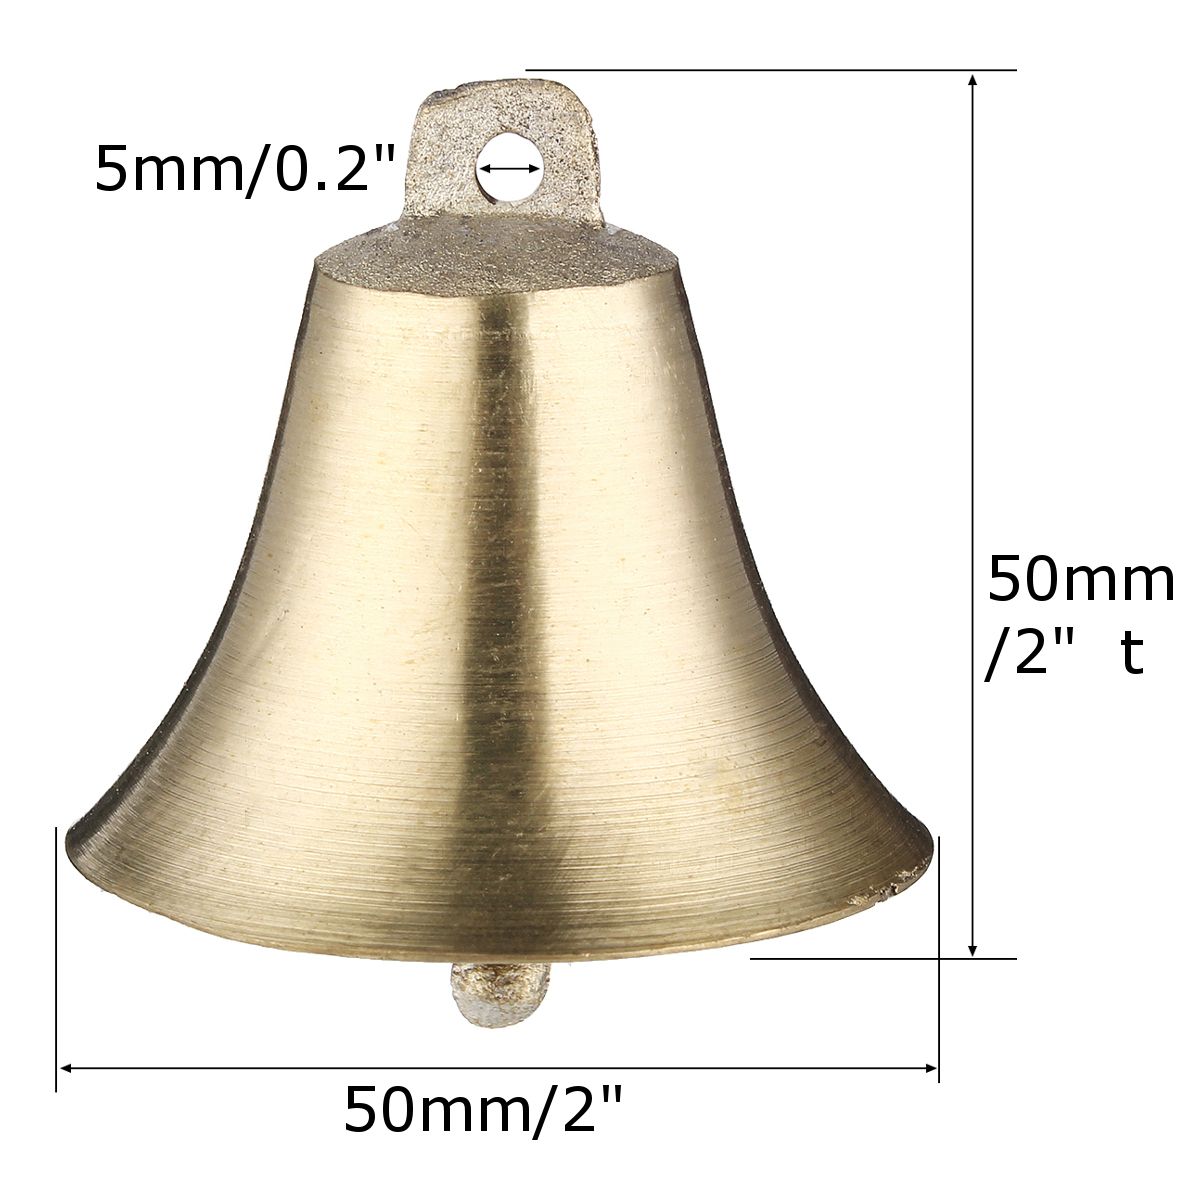 5050mm-Pure-Copper-Bells-Cow-Horse-Sheep-Animal-Neck-Decorations-Farm-Grazing-Super-Loud-Bell-1364769